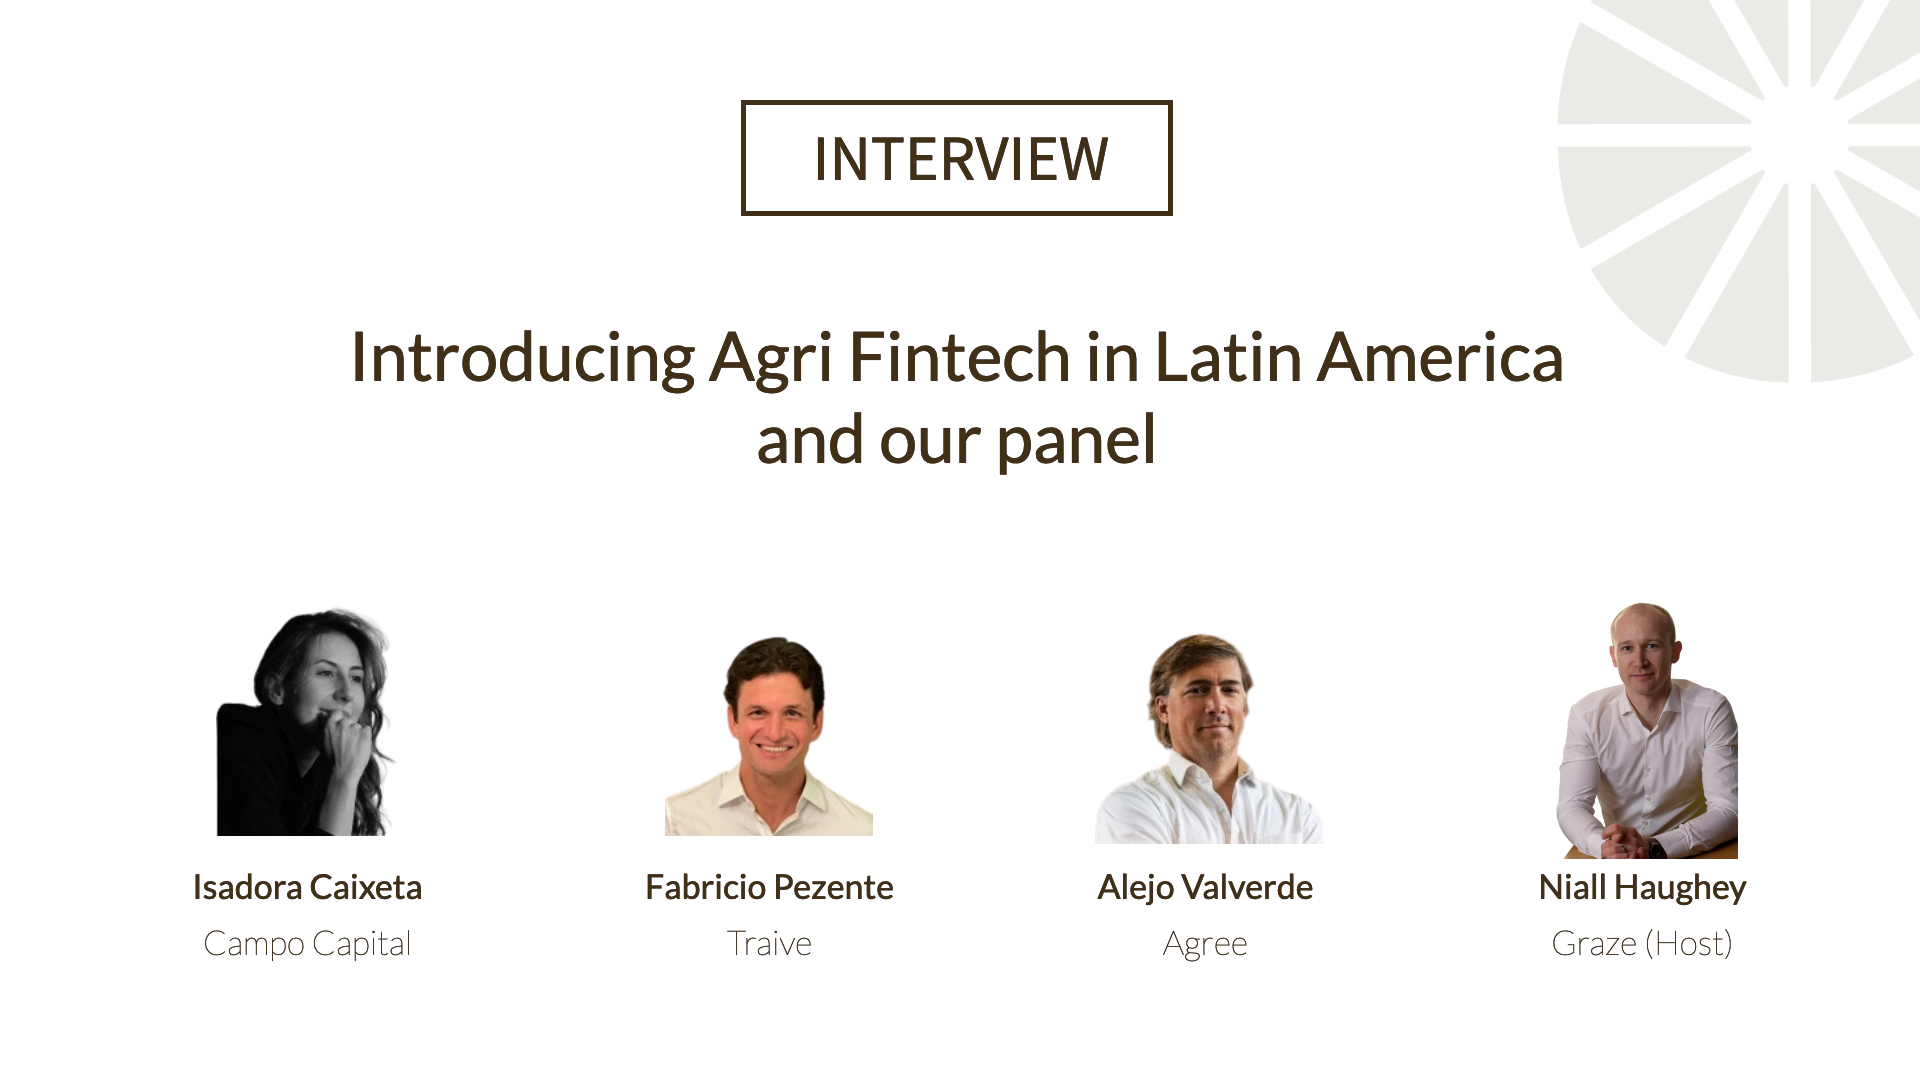 🌱 What can we learn from Agri Fintech in Latin America? 🚀